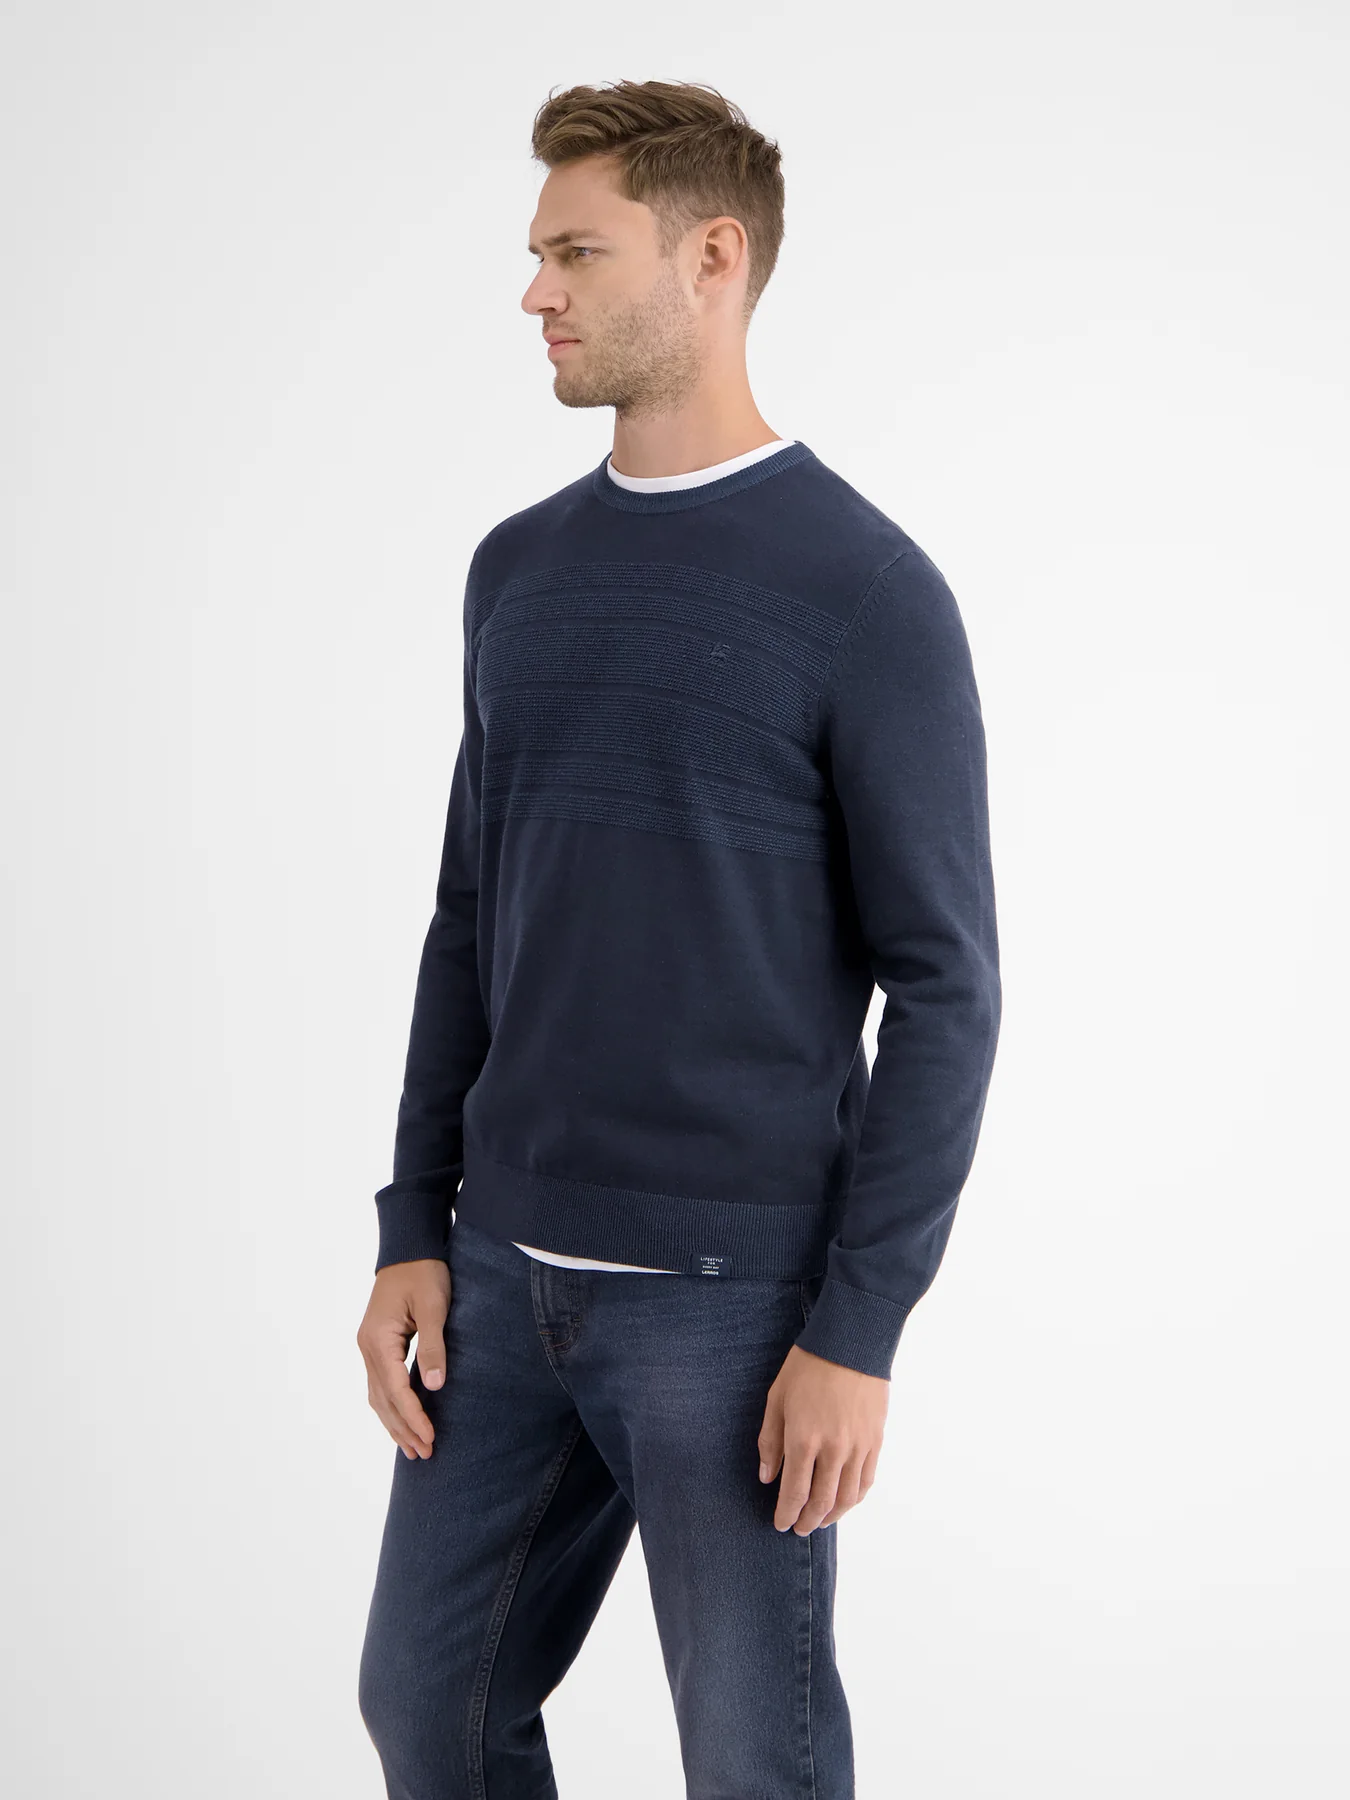 with LERROS Classic - - Blues Blue Sweater | / Stripes Navy Cotton